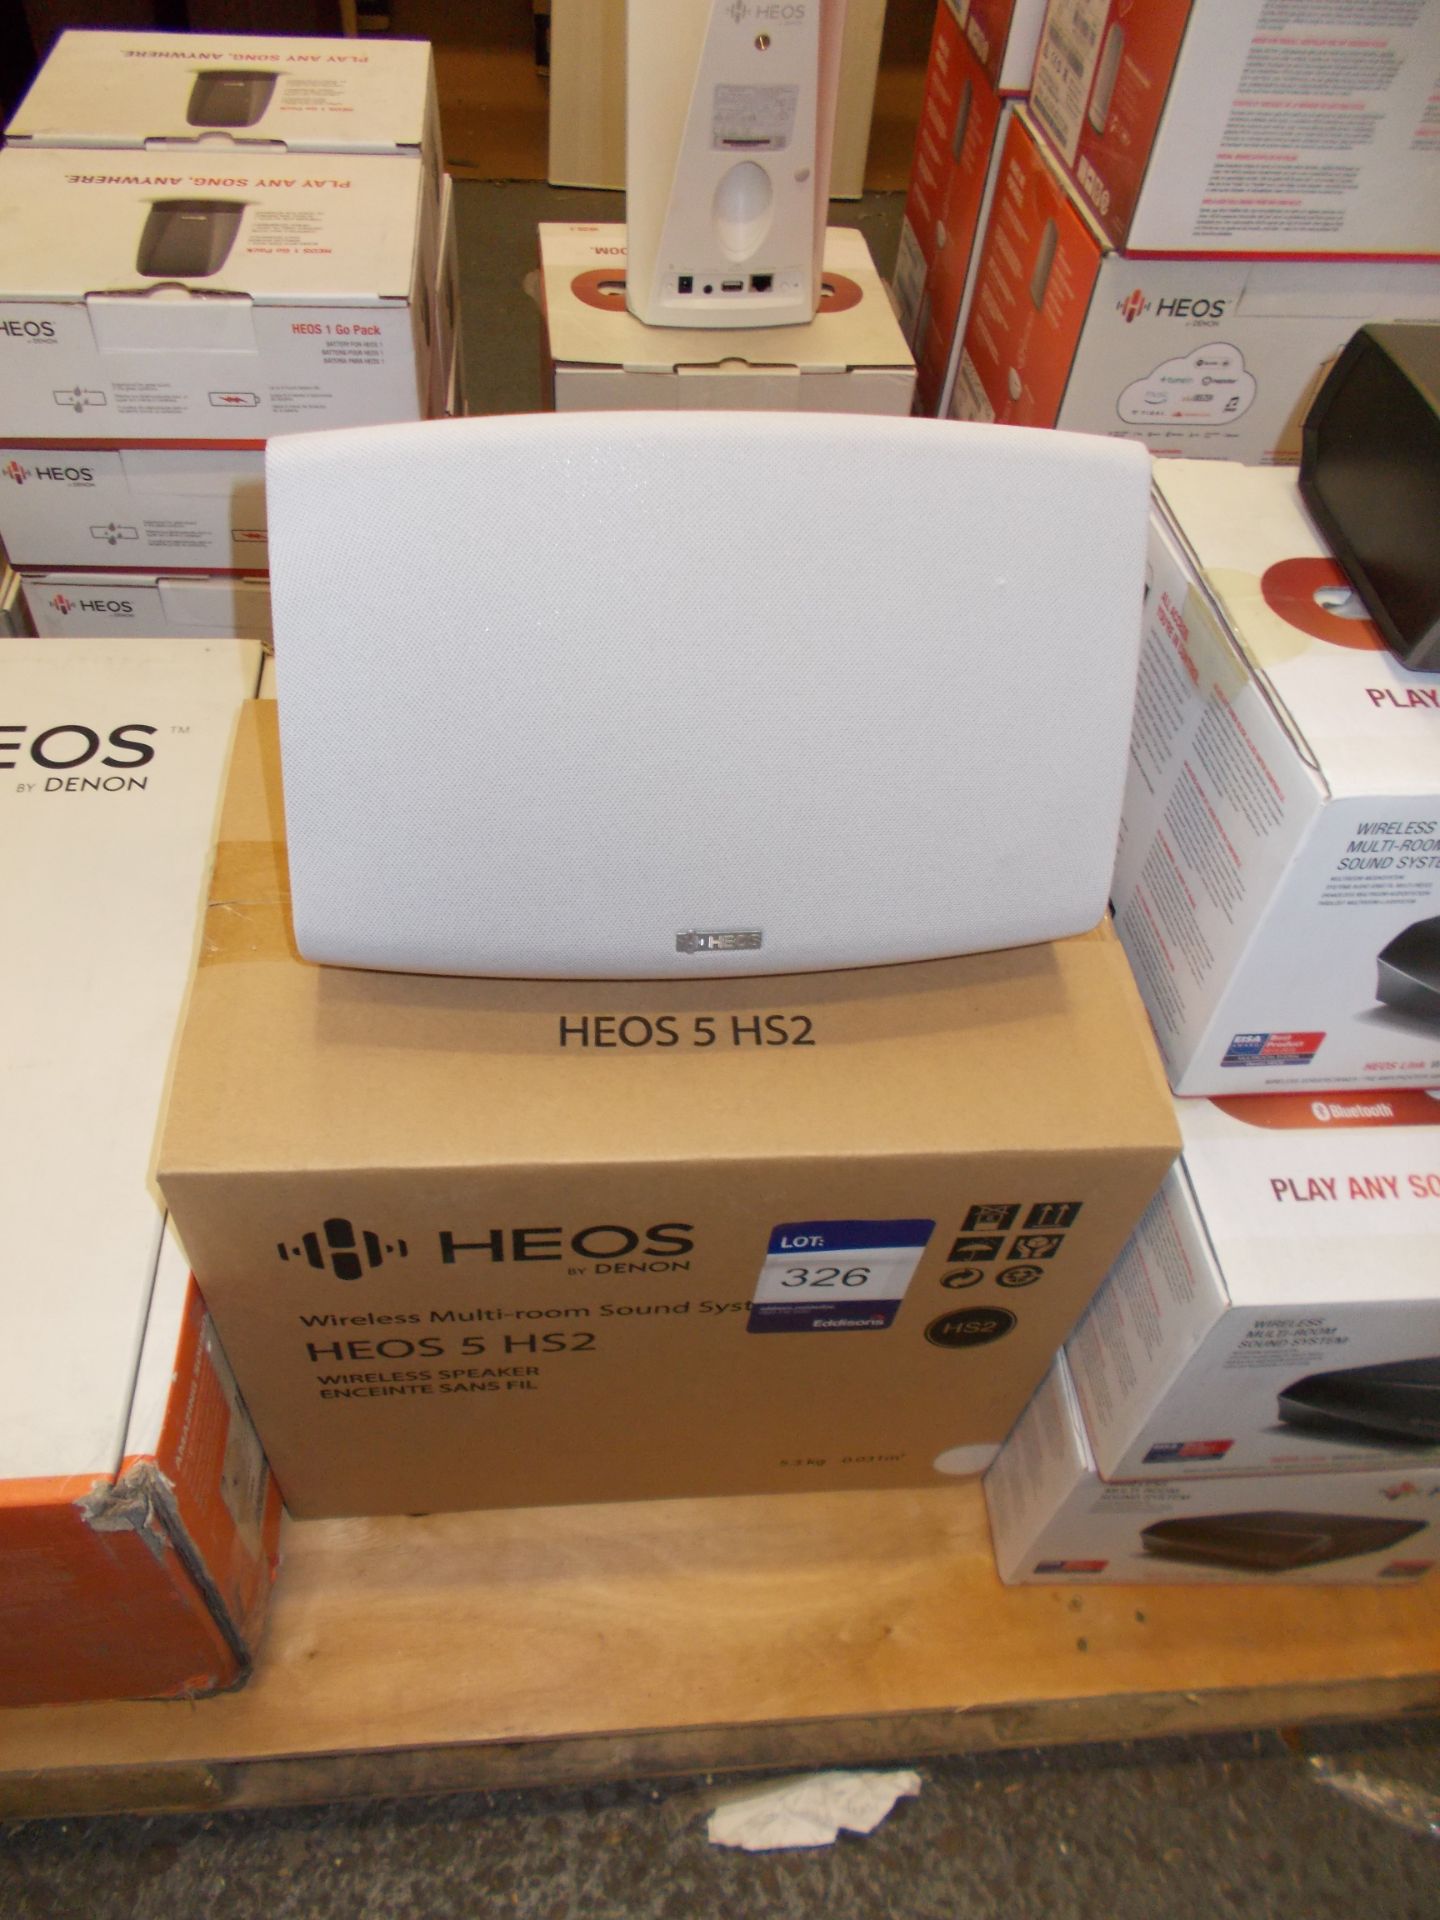 Heos by Denon HEOS 5HS2 Wireless White Speaker (on display) – RRP £319